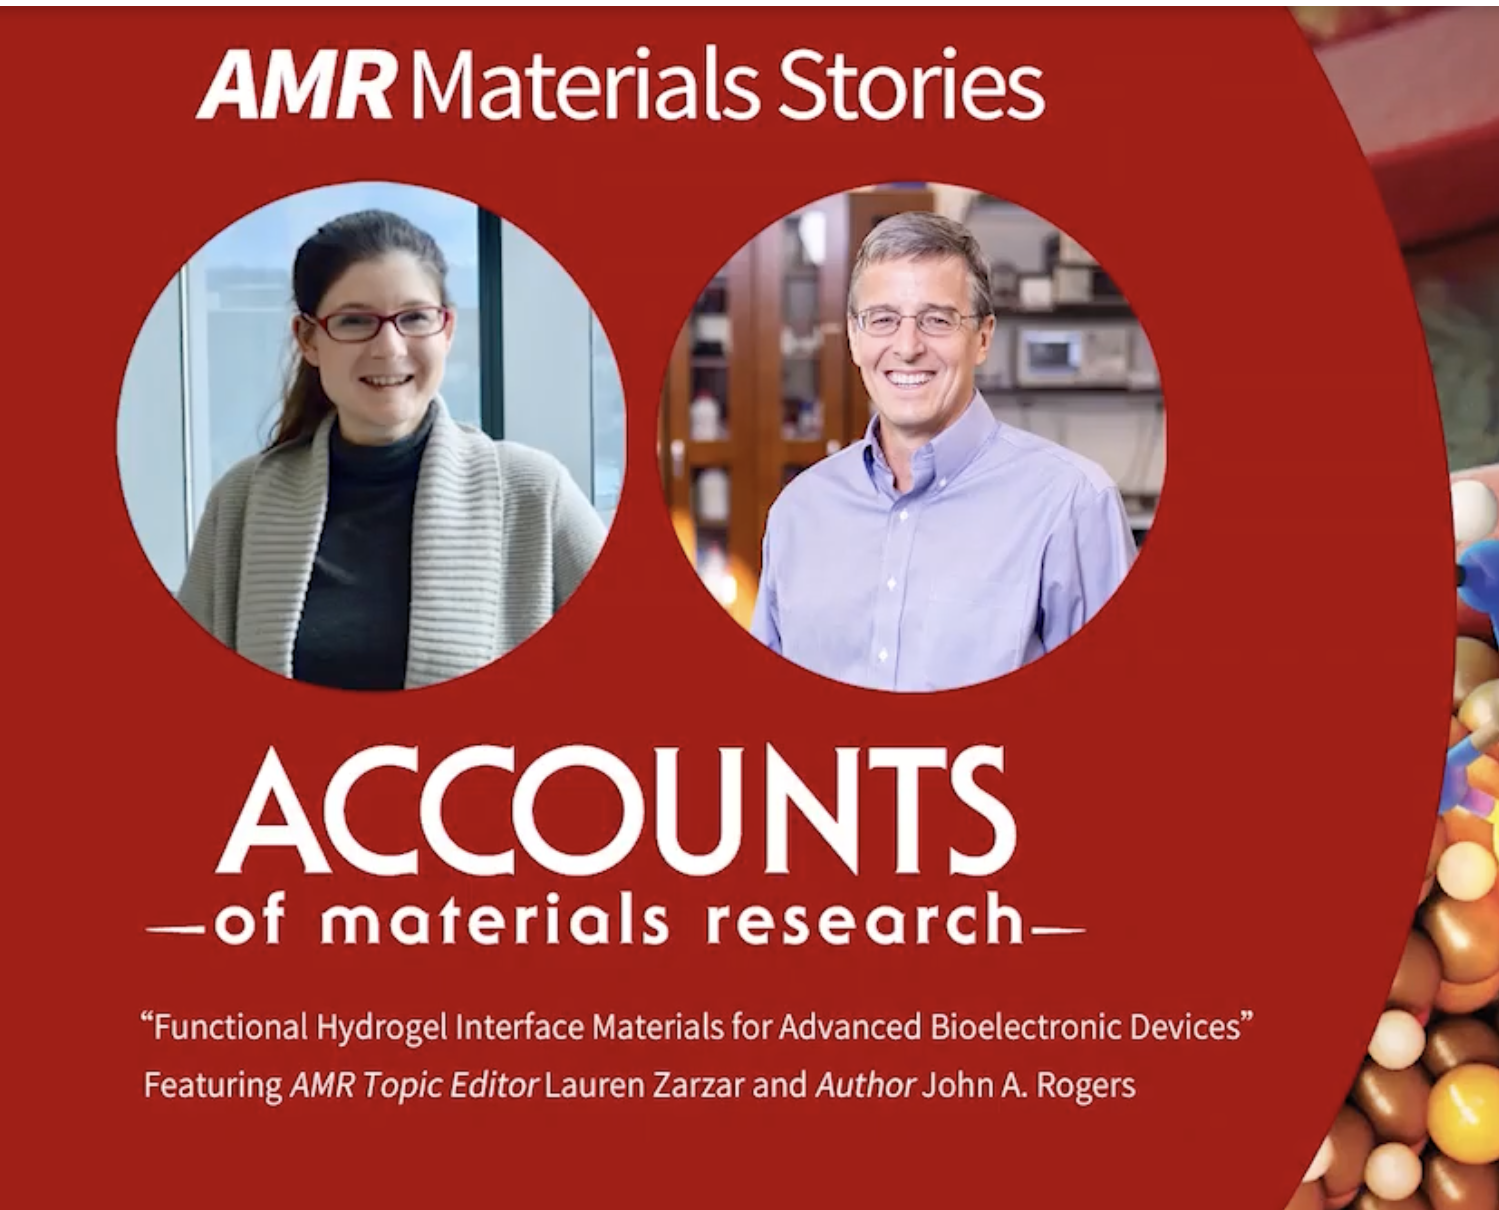 Materials Research podcast